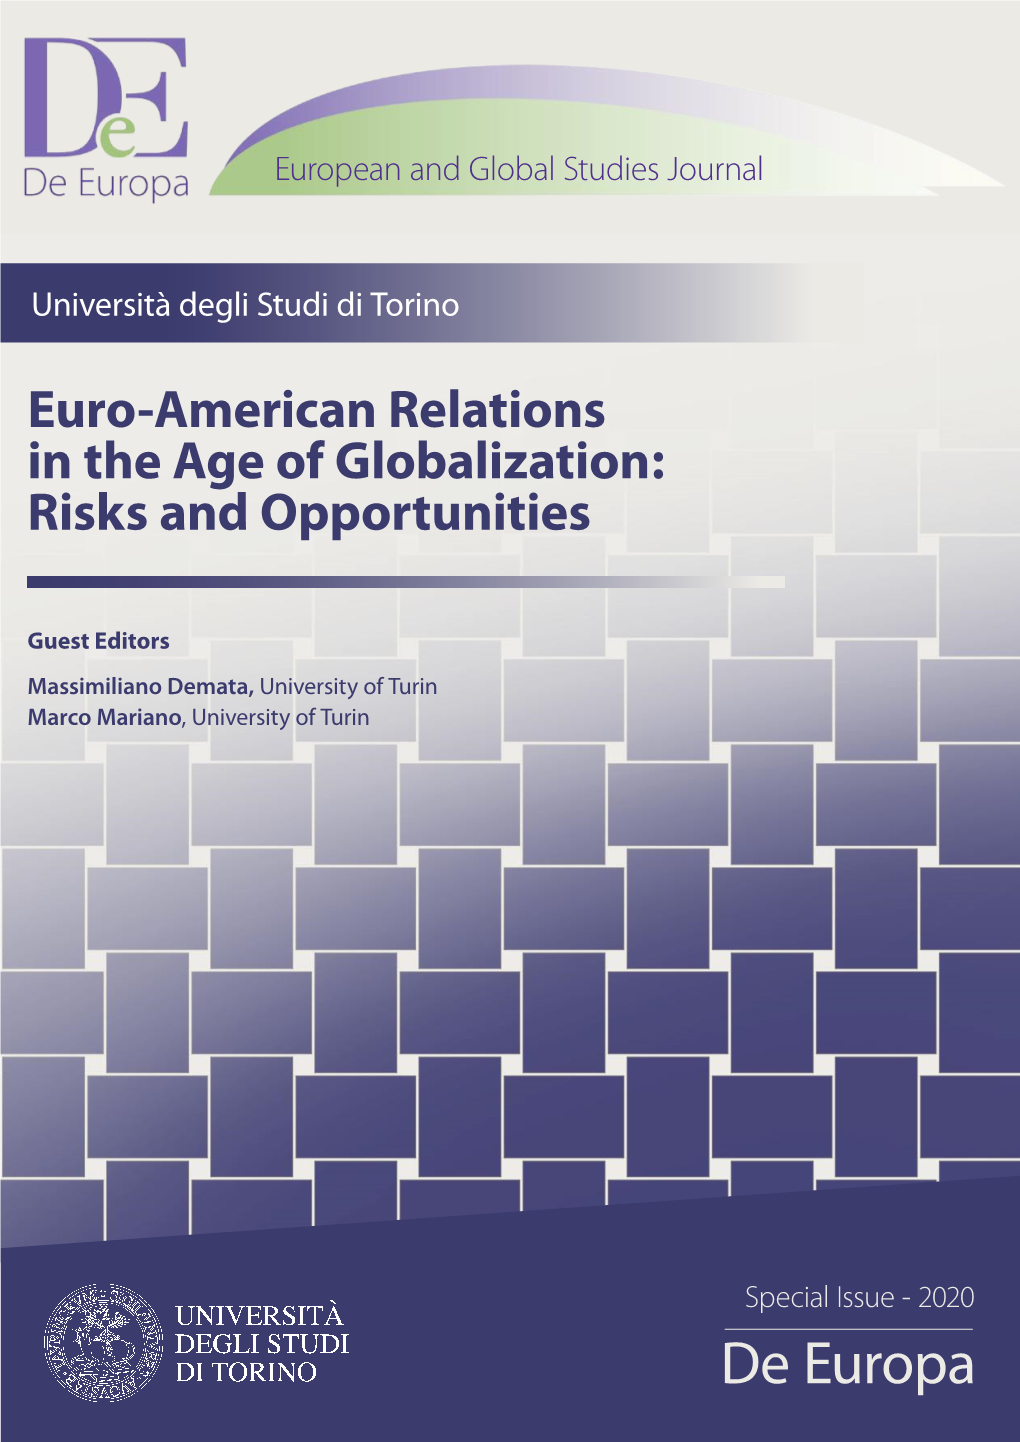 Euro-American Relations in the Age of Globalization: Risks and Opportunities